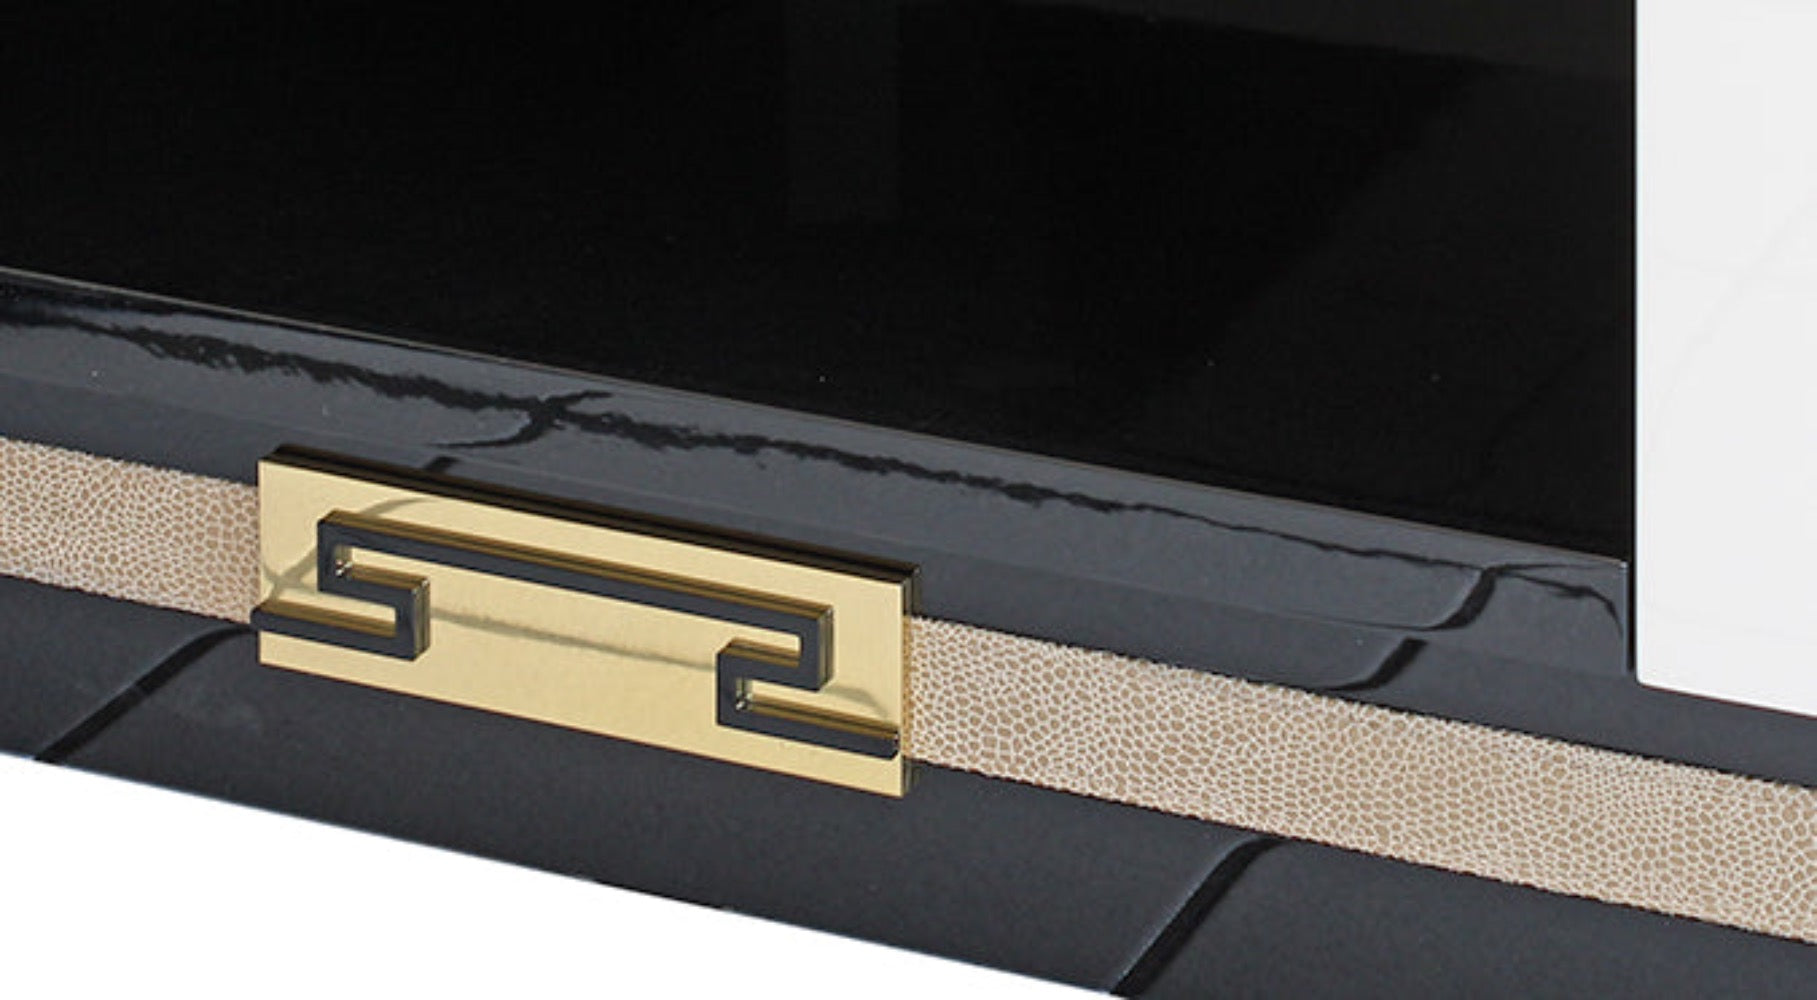 leather strap and gold buckle detail on the tv stand